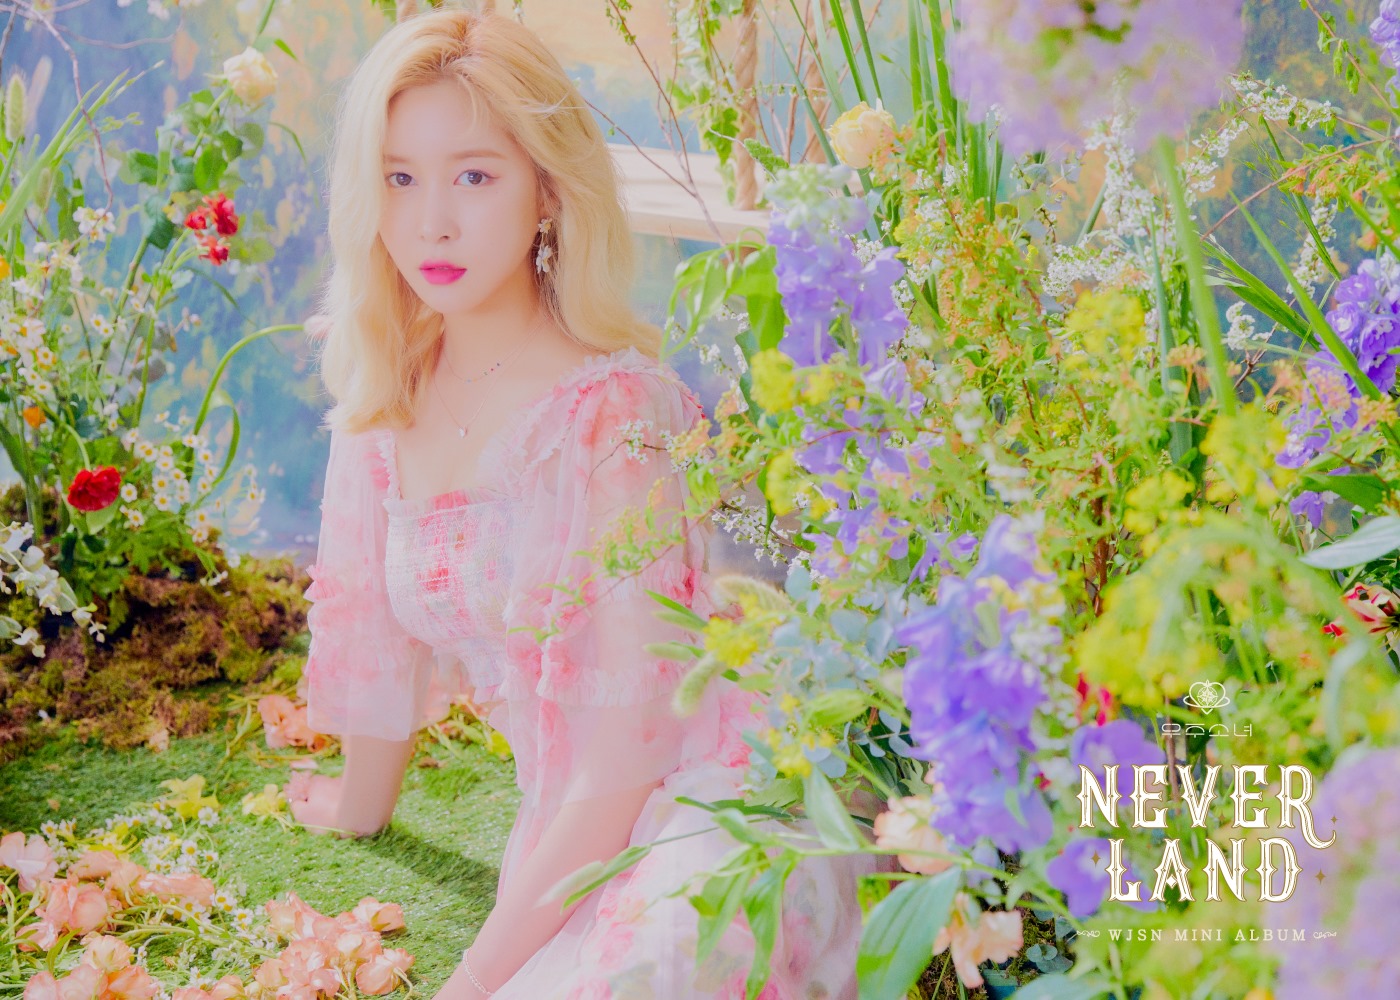 WATCH: Cosmic Girls Look Dreamy In The Concept Teaser For "Neverland"